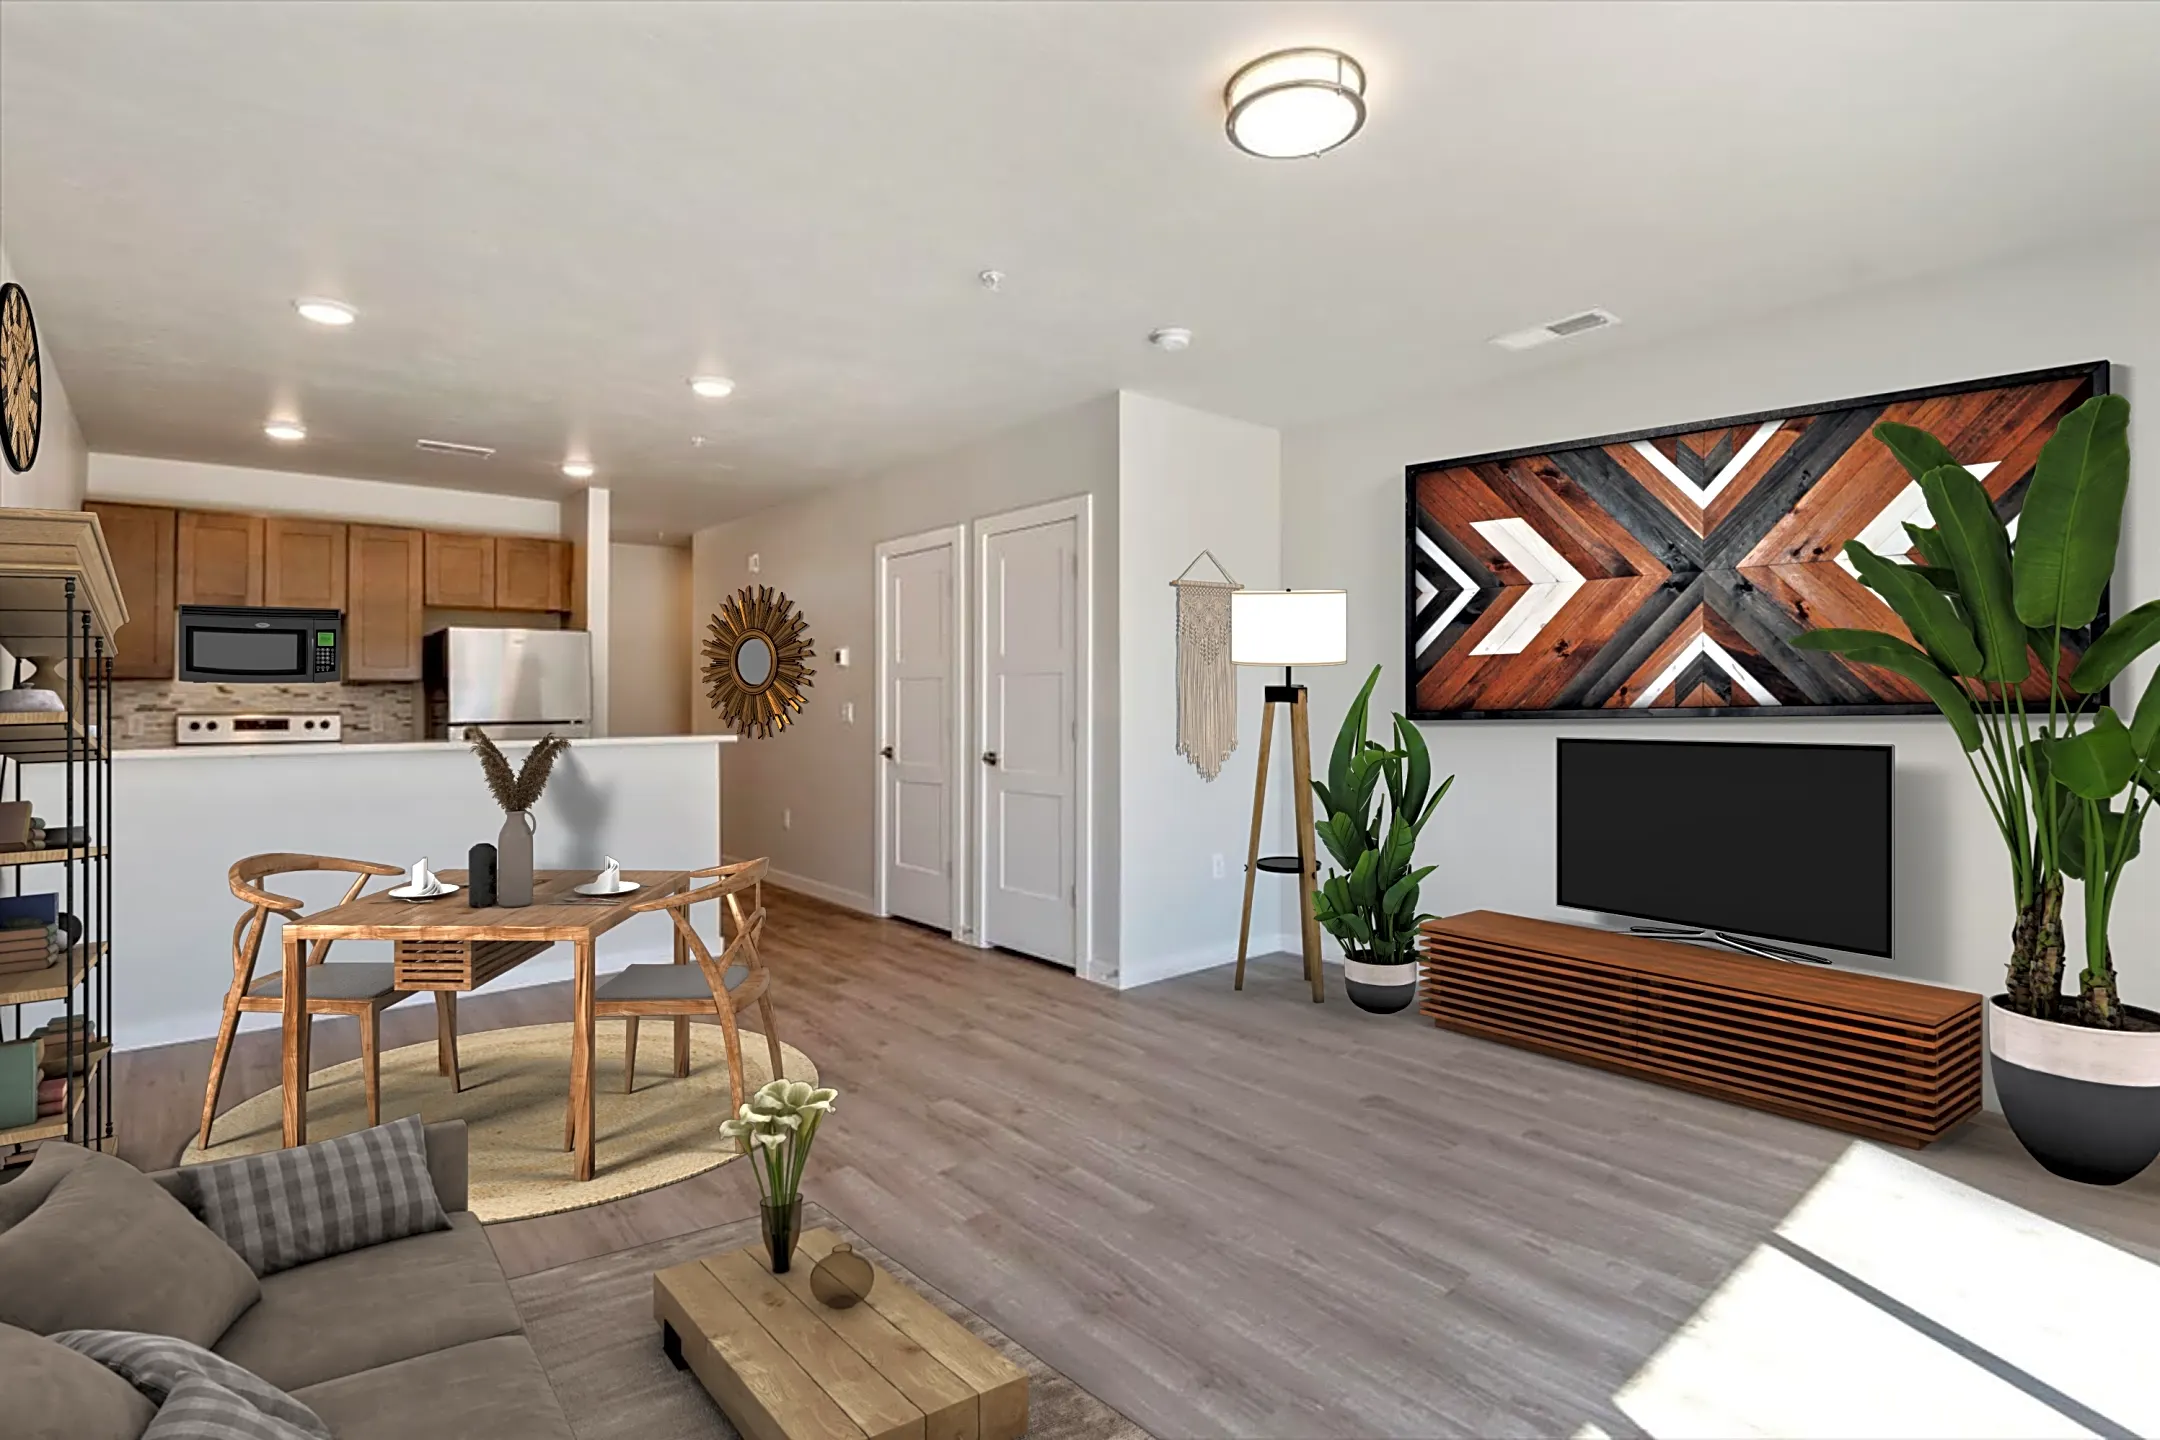 Living Room - Townhomes At The Silo - Boise, ID